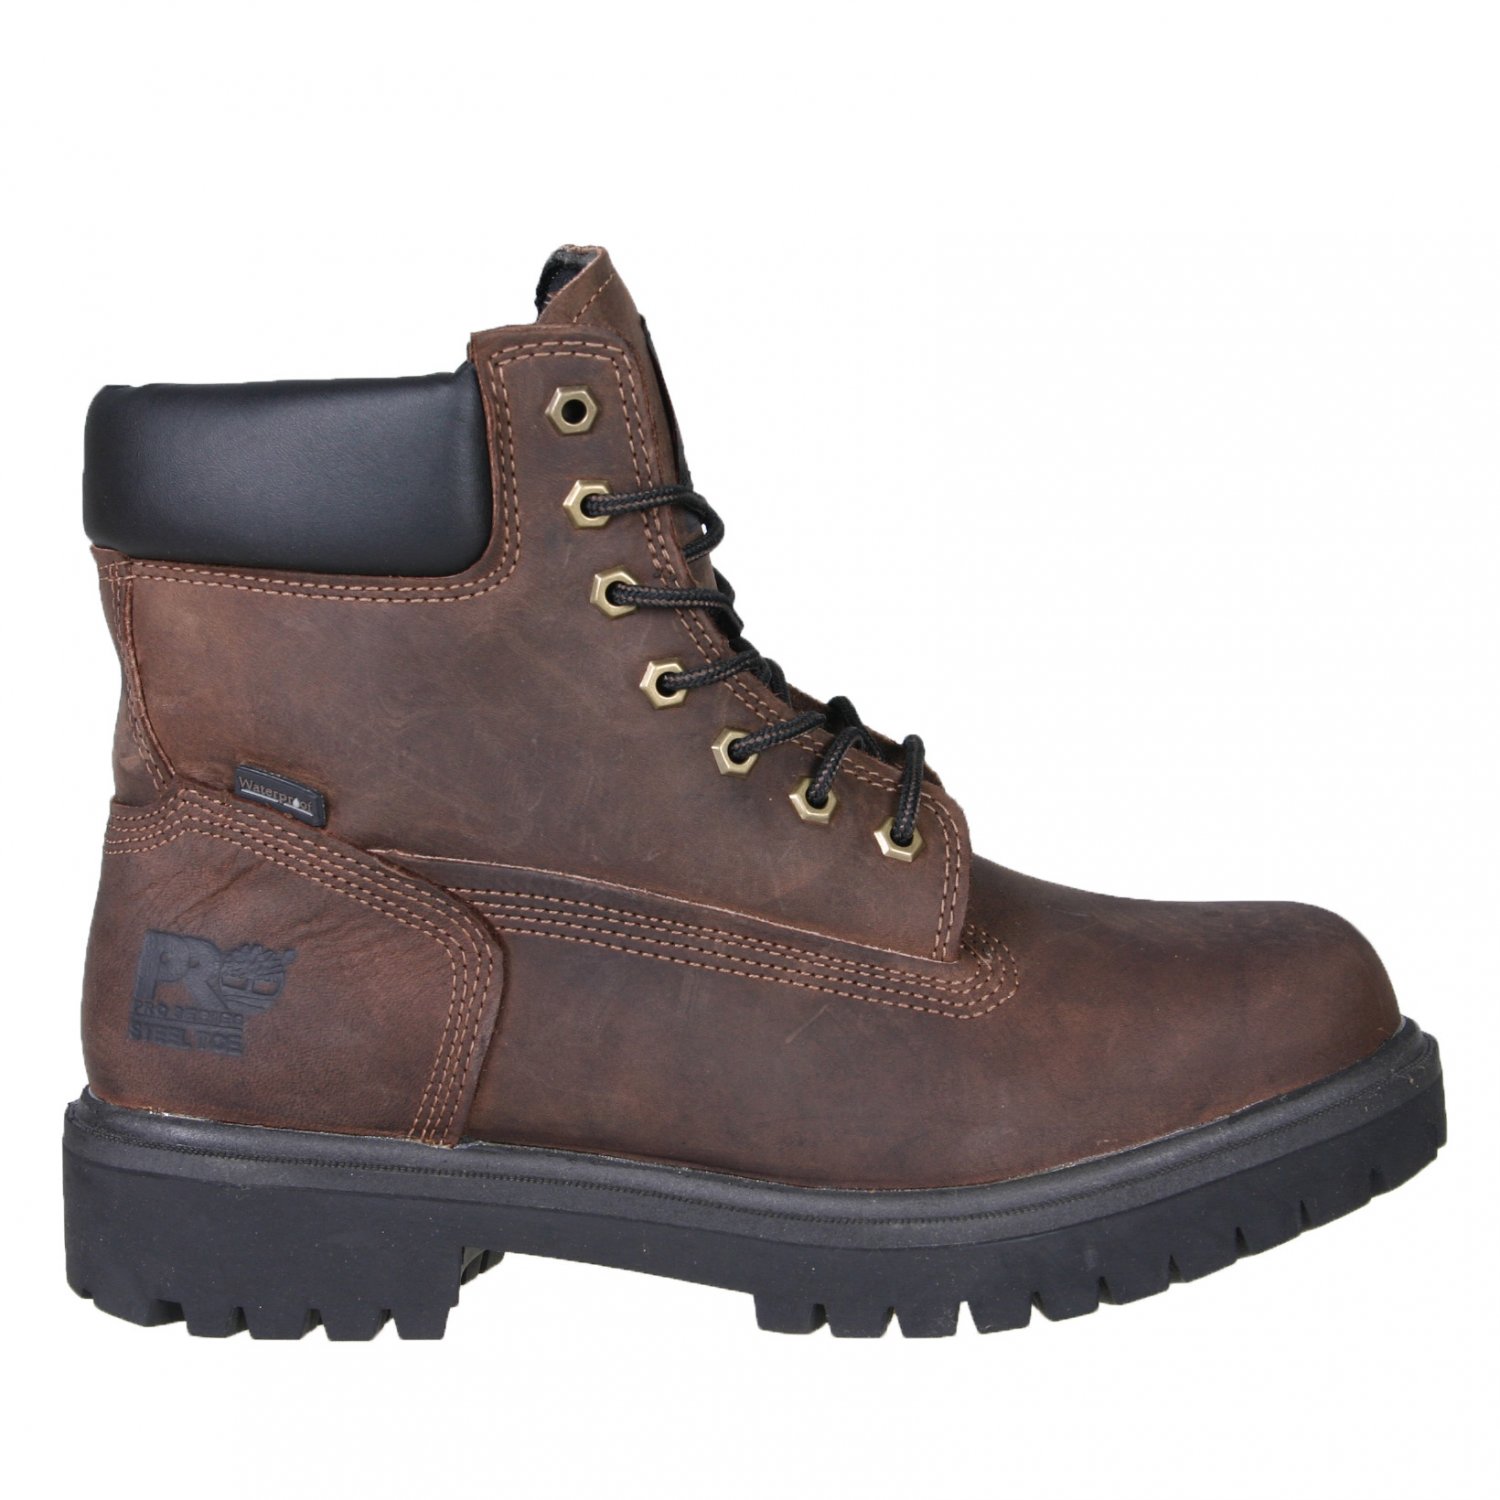 Timberland Steel Toe Boots Pro Series Thermolite Waterproof NEW IN BOX ...